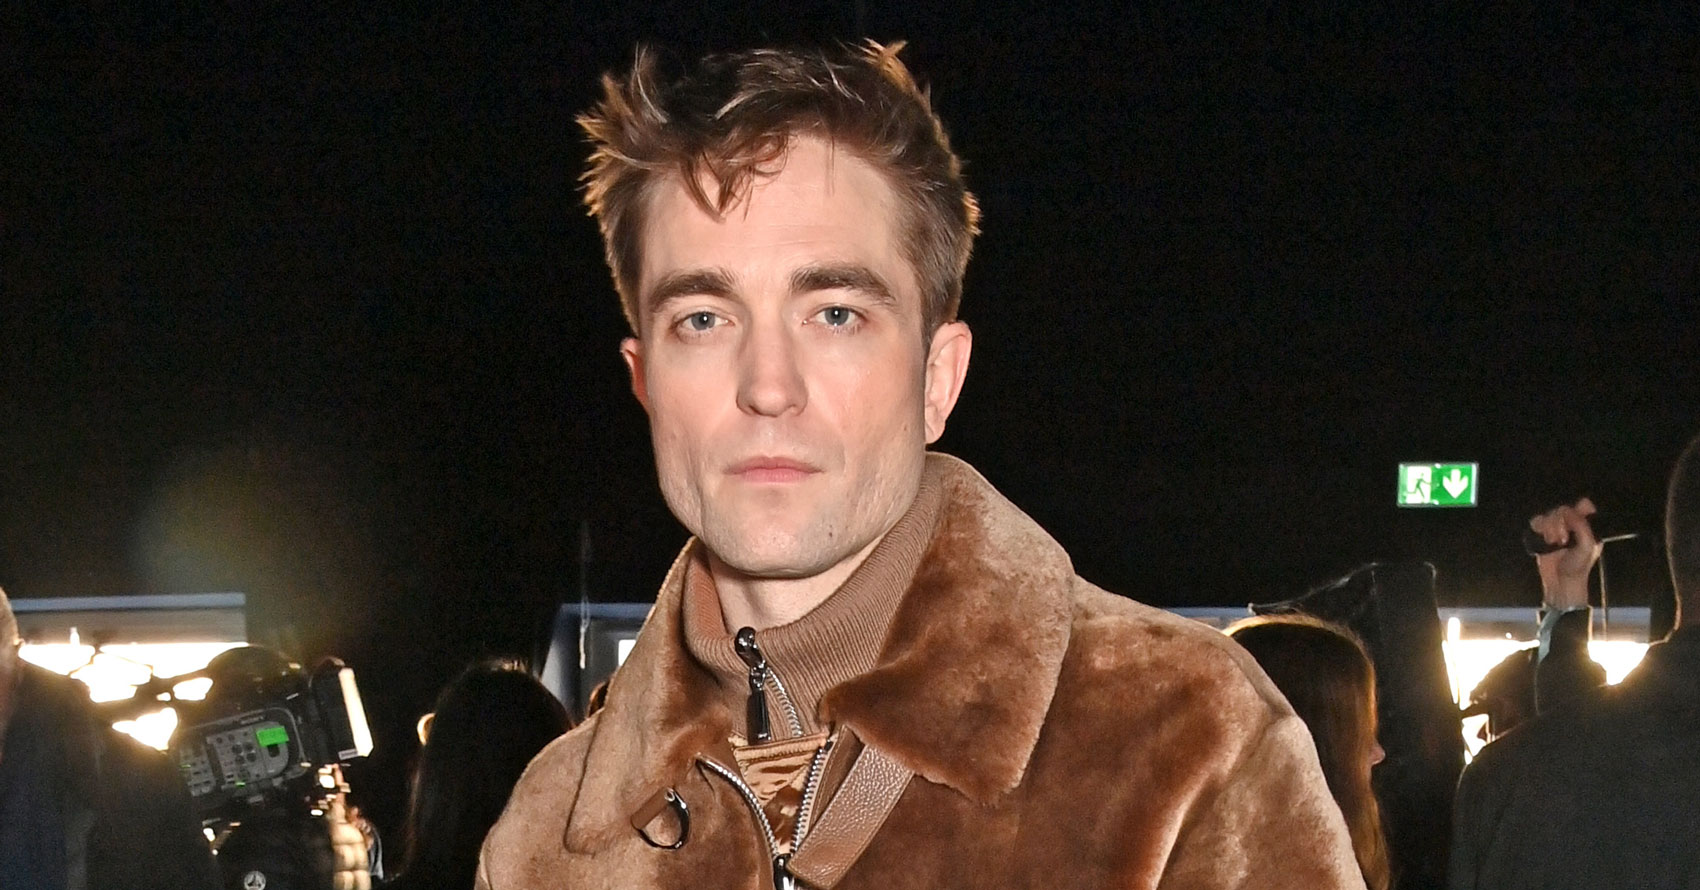 Robert Pattinson Wore a Skirt to the Dior Show in Paris and It's Gonna Go Viral